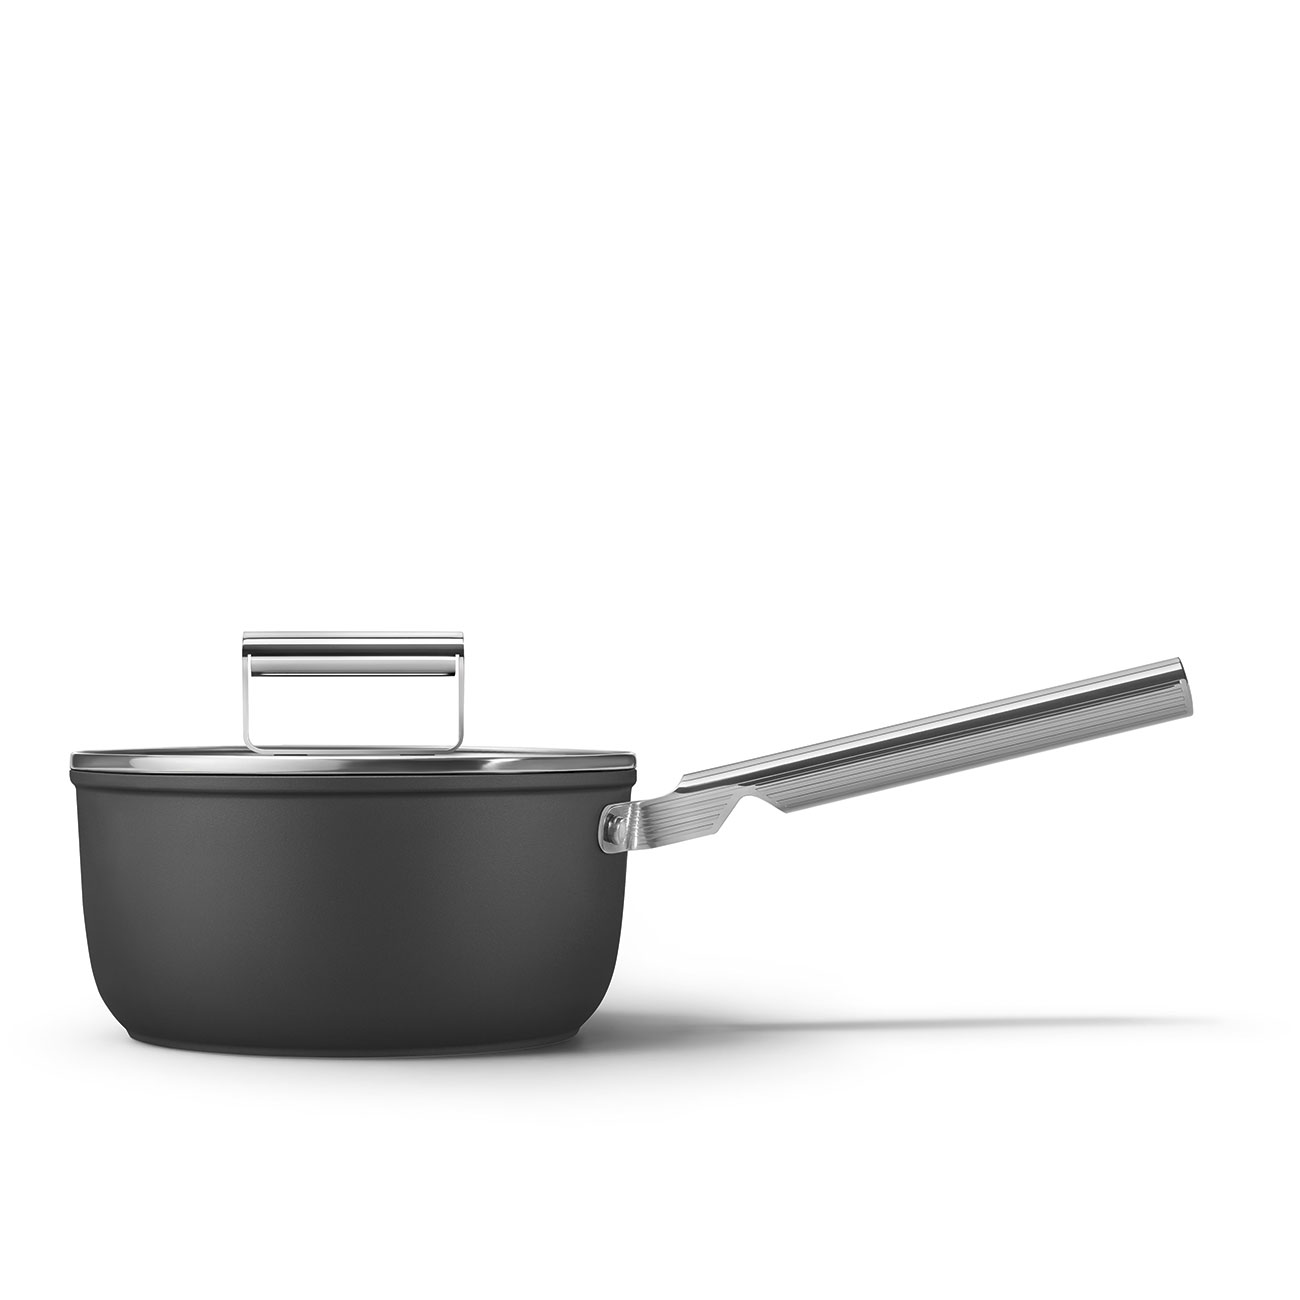 Smeg Black Non-stick Saucepan with glass lid and stainless steel handle_1